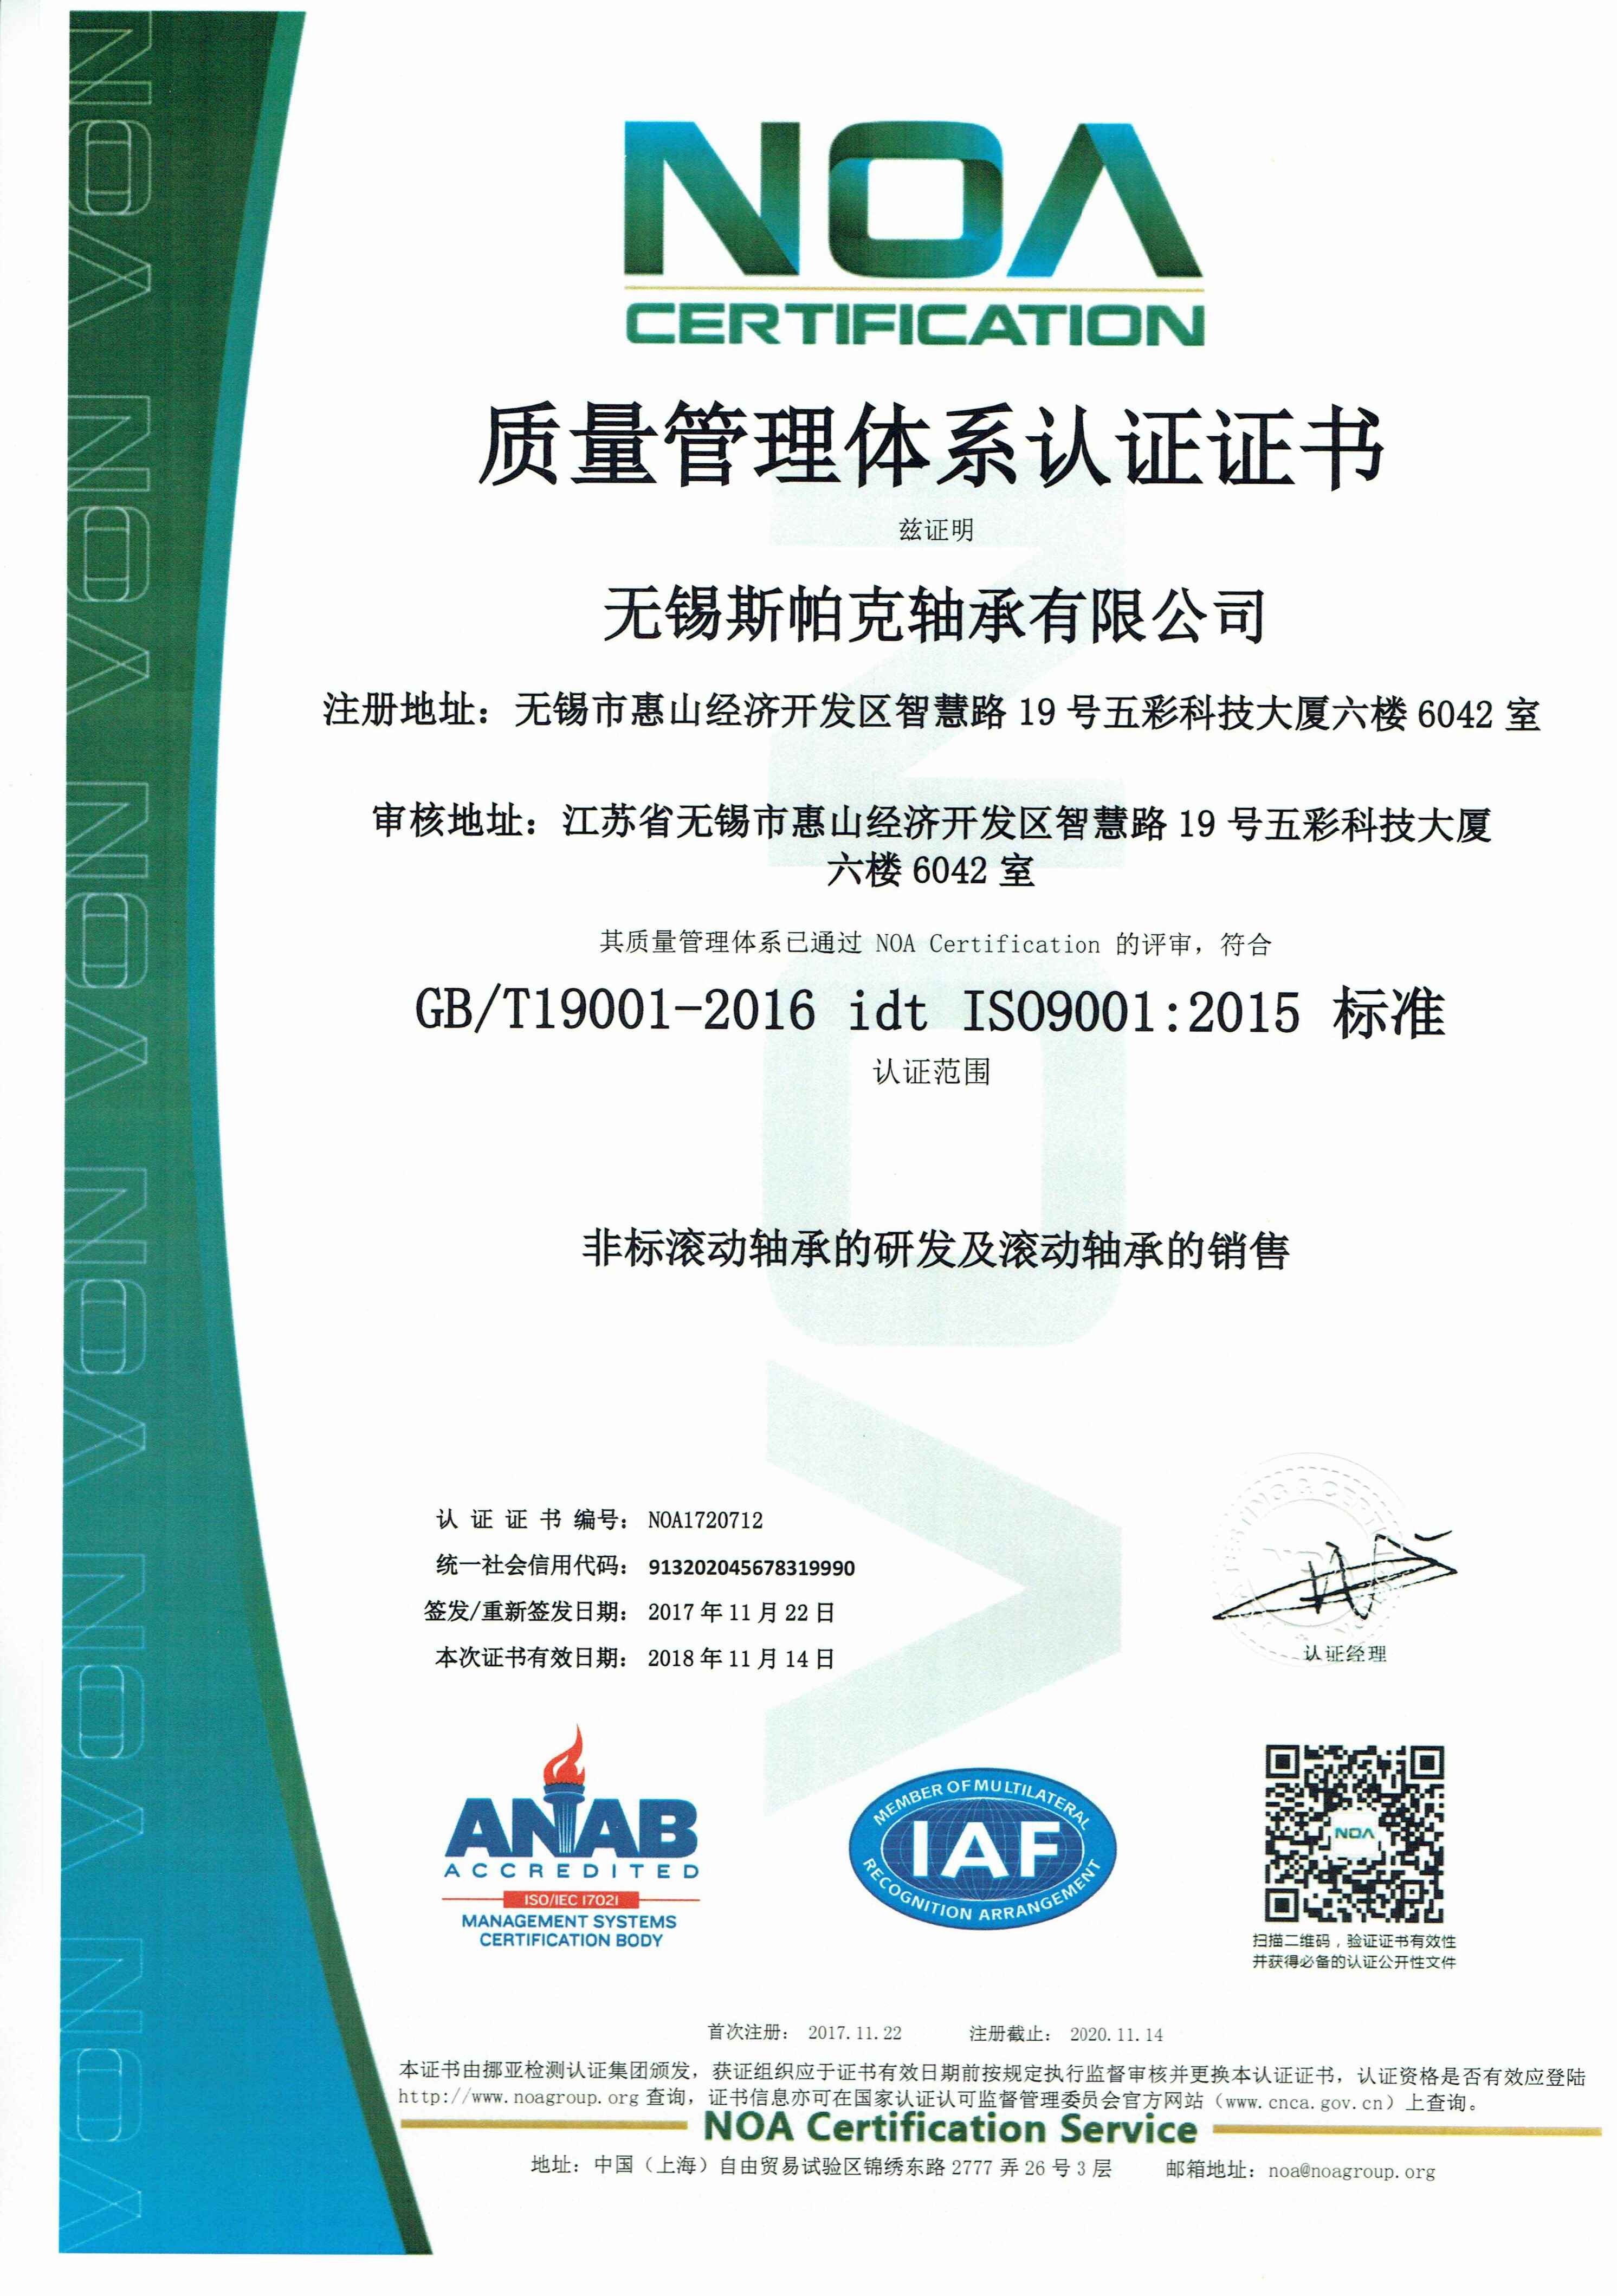 Roller Bearings quality management system certification China